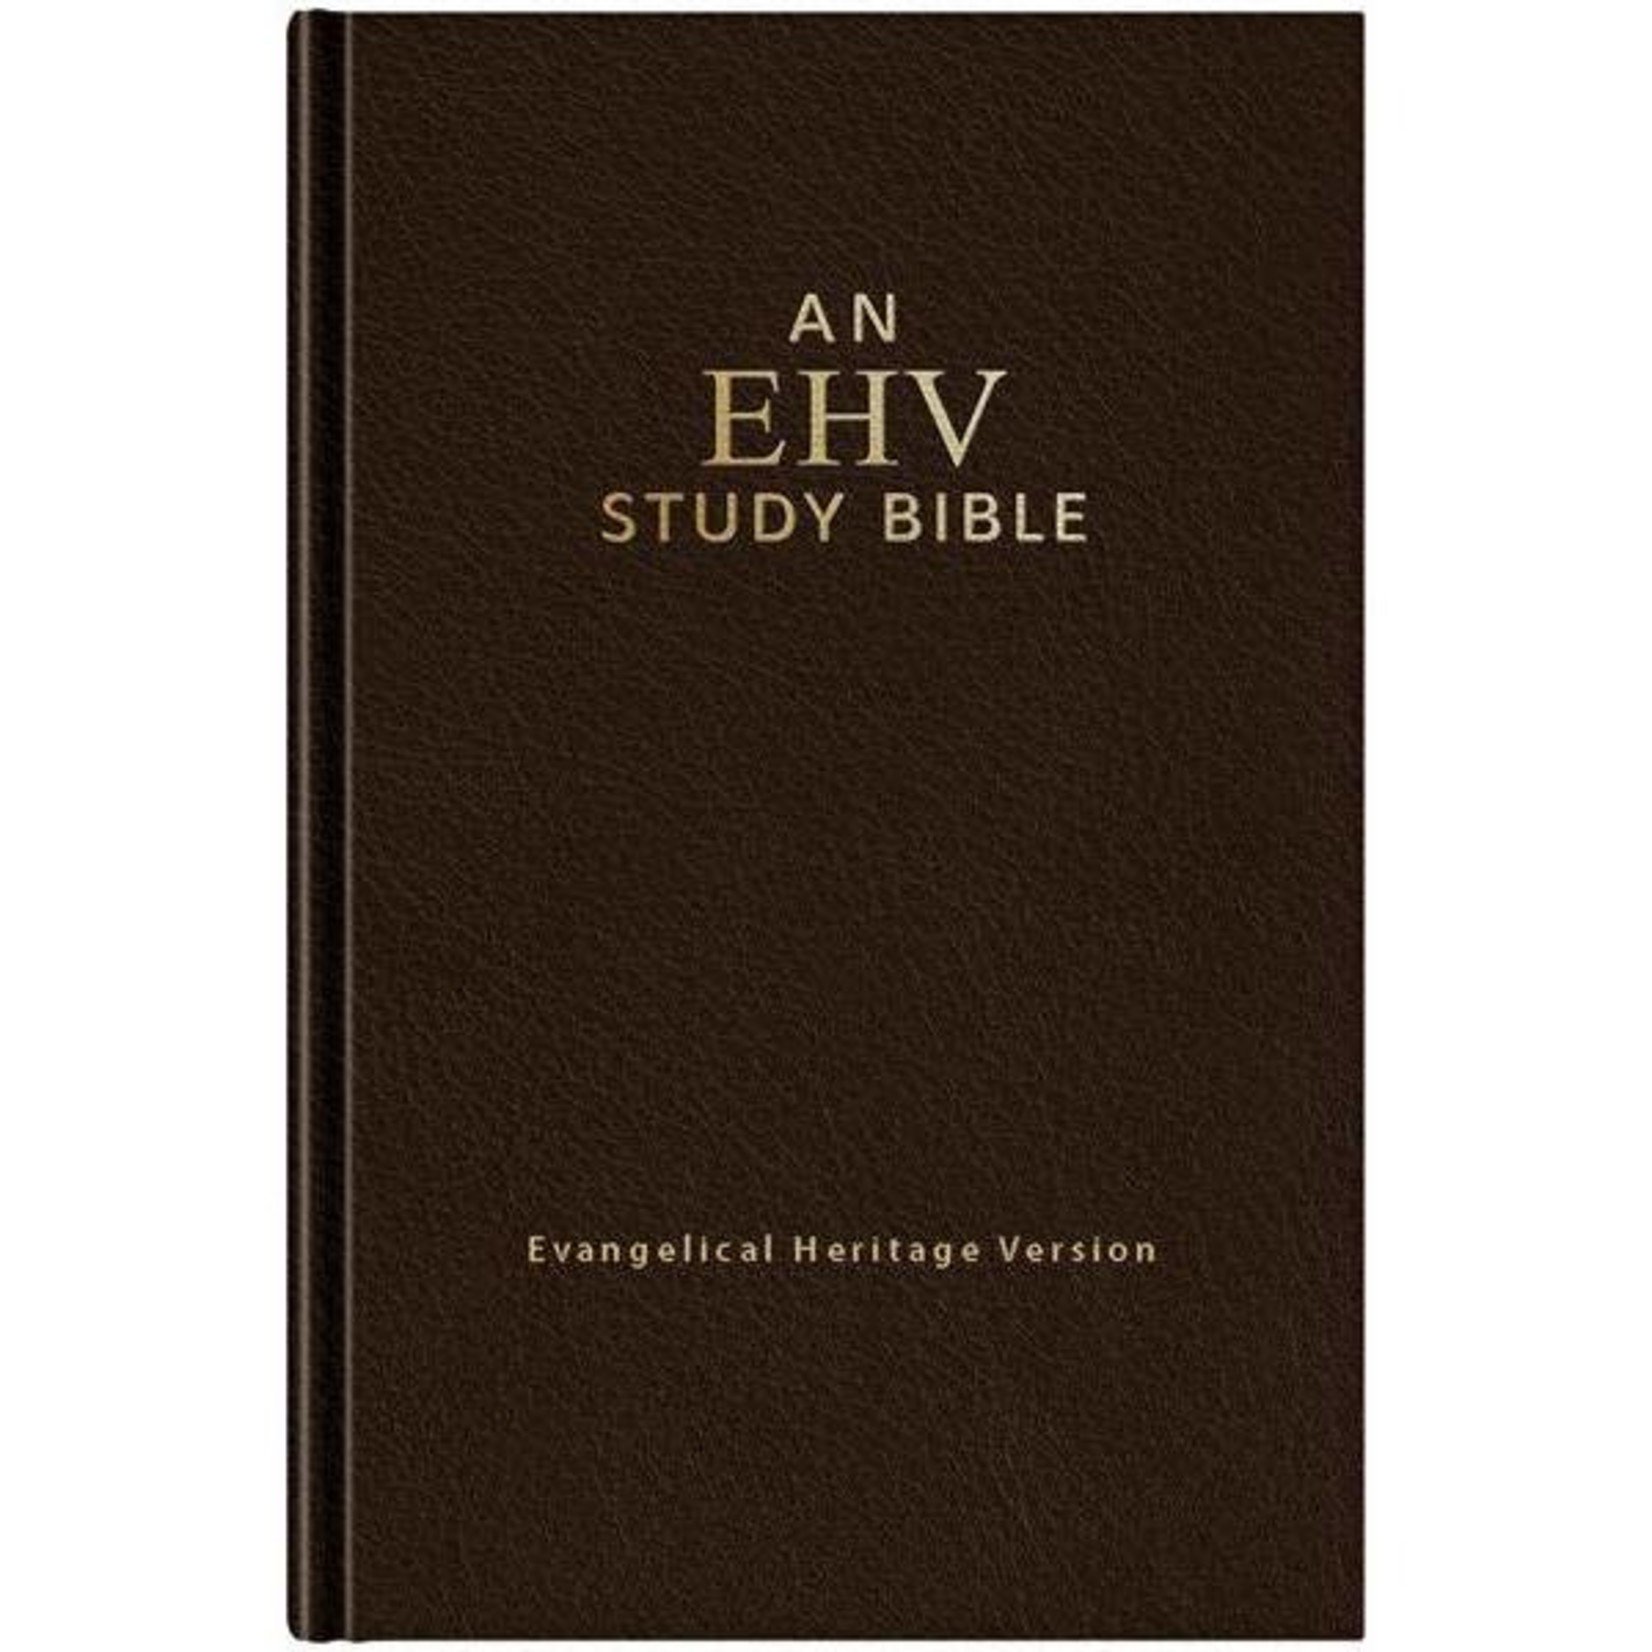 Northwestern Publishing House Holy Bible (EHV) Evangelical Heritage Version Study Bible (Brown Hardcover)